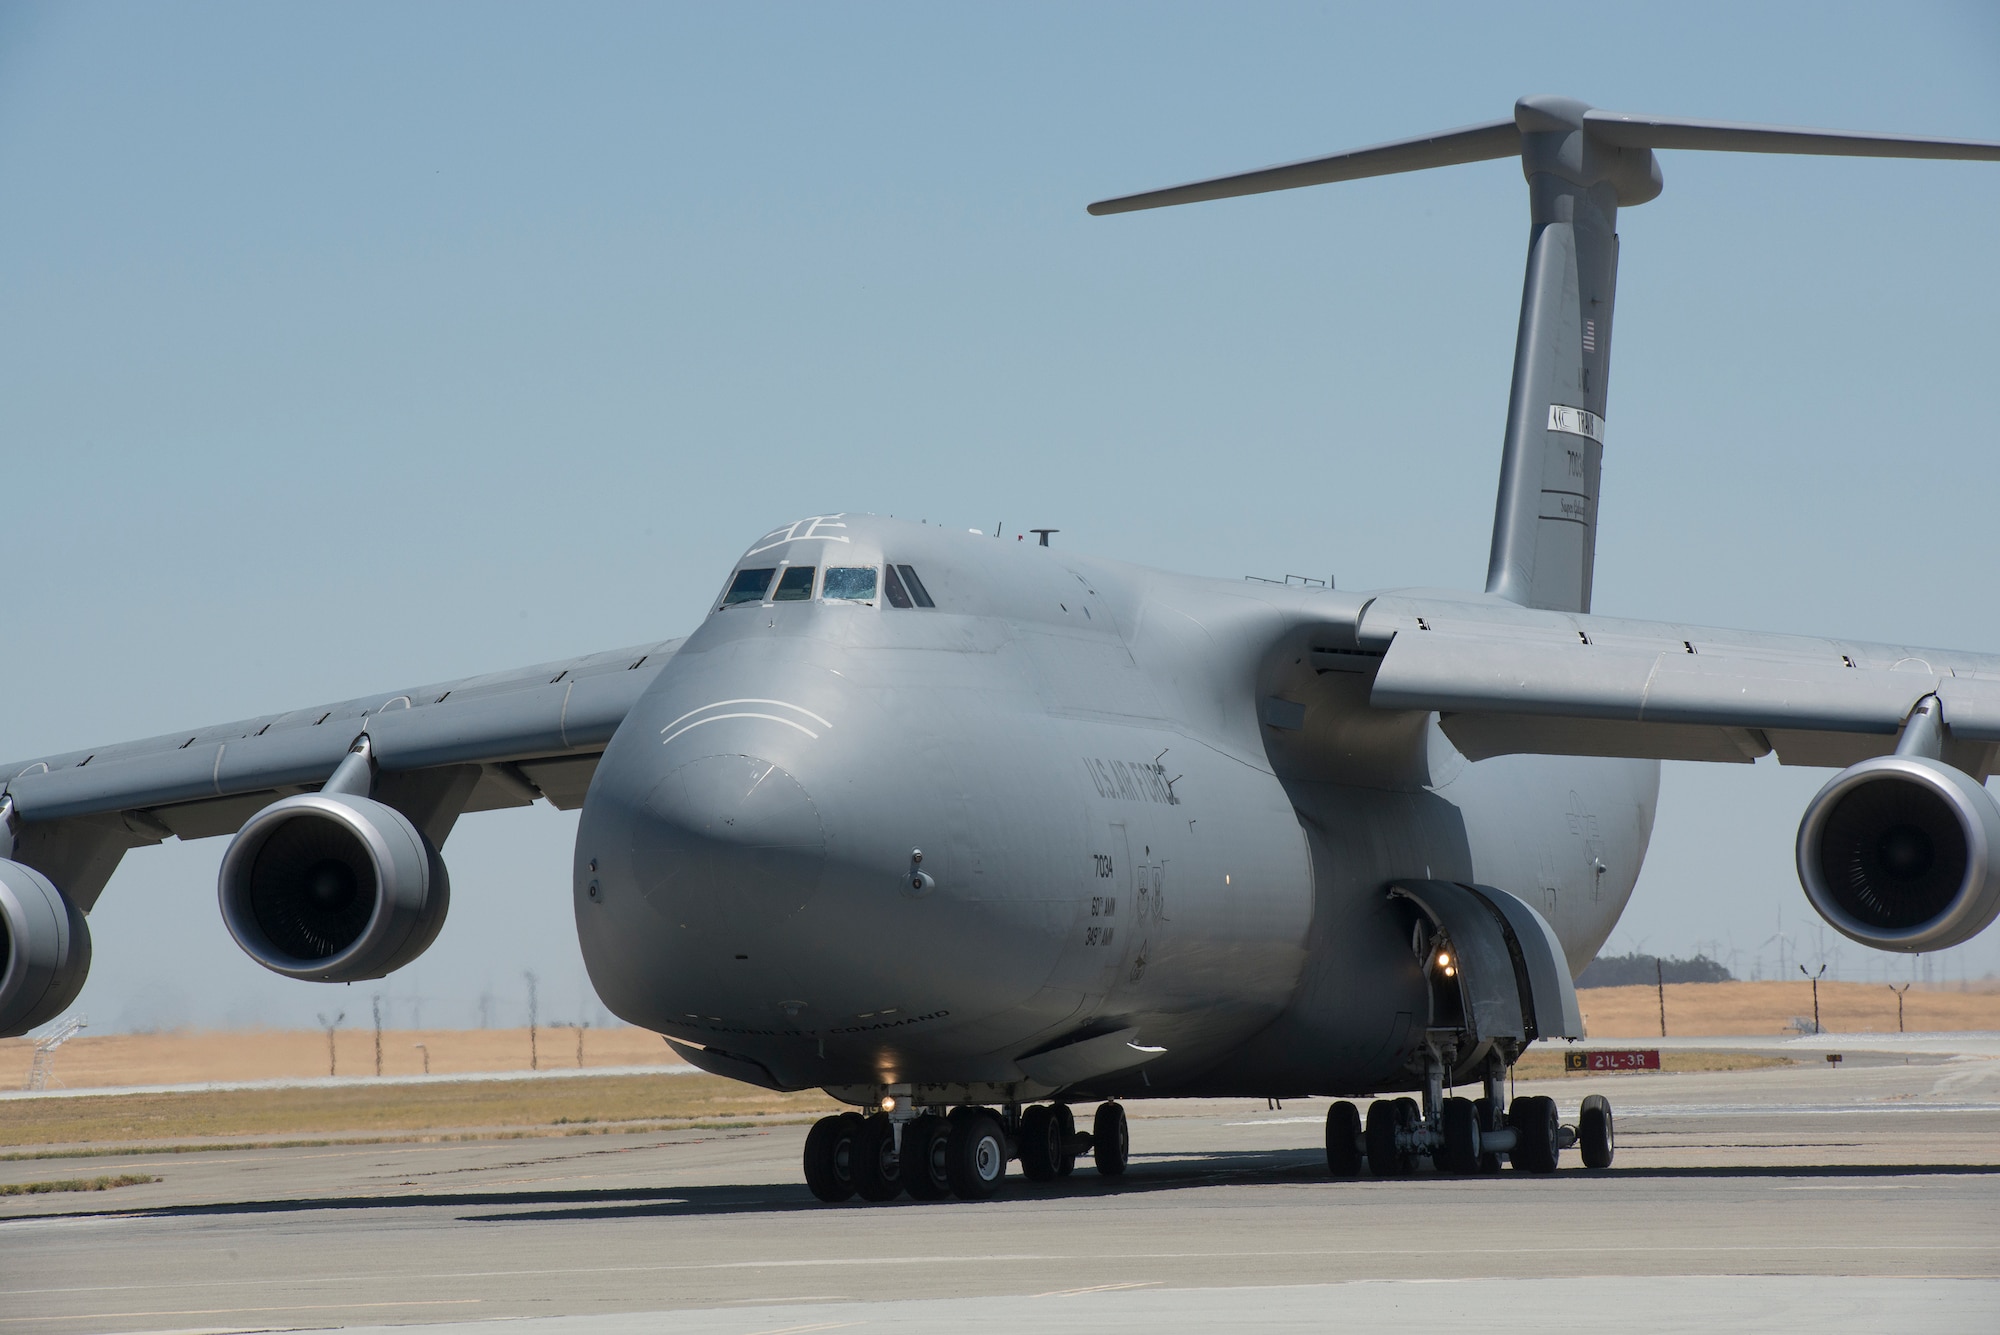 A C-5 M Super Galaxy on the ramp at Travis AFB, Calif., July 28, 2015. As the Air Force’s largest and only strategic airlifter, the C-5M Super Galaxy can carry more cargo farther distances than any other aircraft. This C-5M Super Galaxy is an upgraded version with new engines and modernized avionics designed to extend its service life beyond 2040. (U.S. Air Force Photograph/Heide Couch)